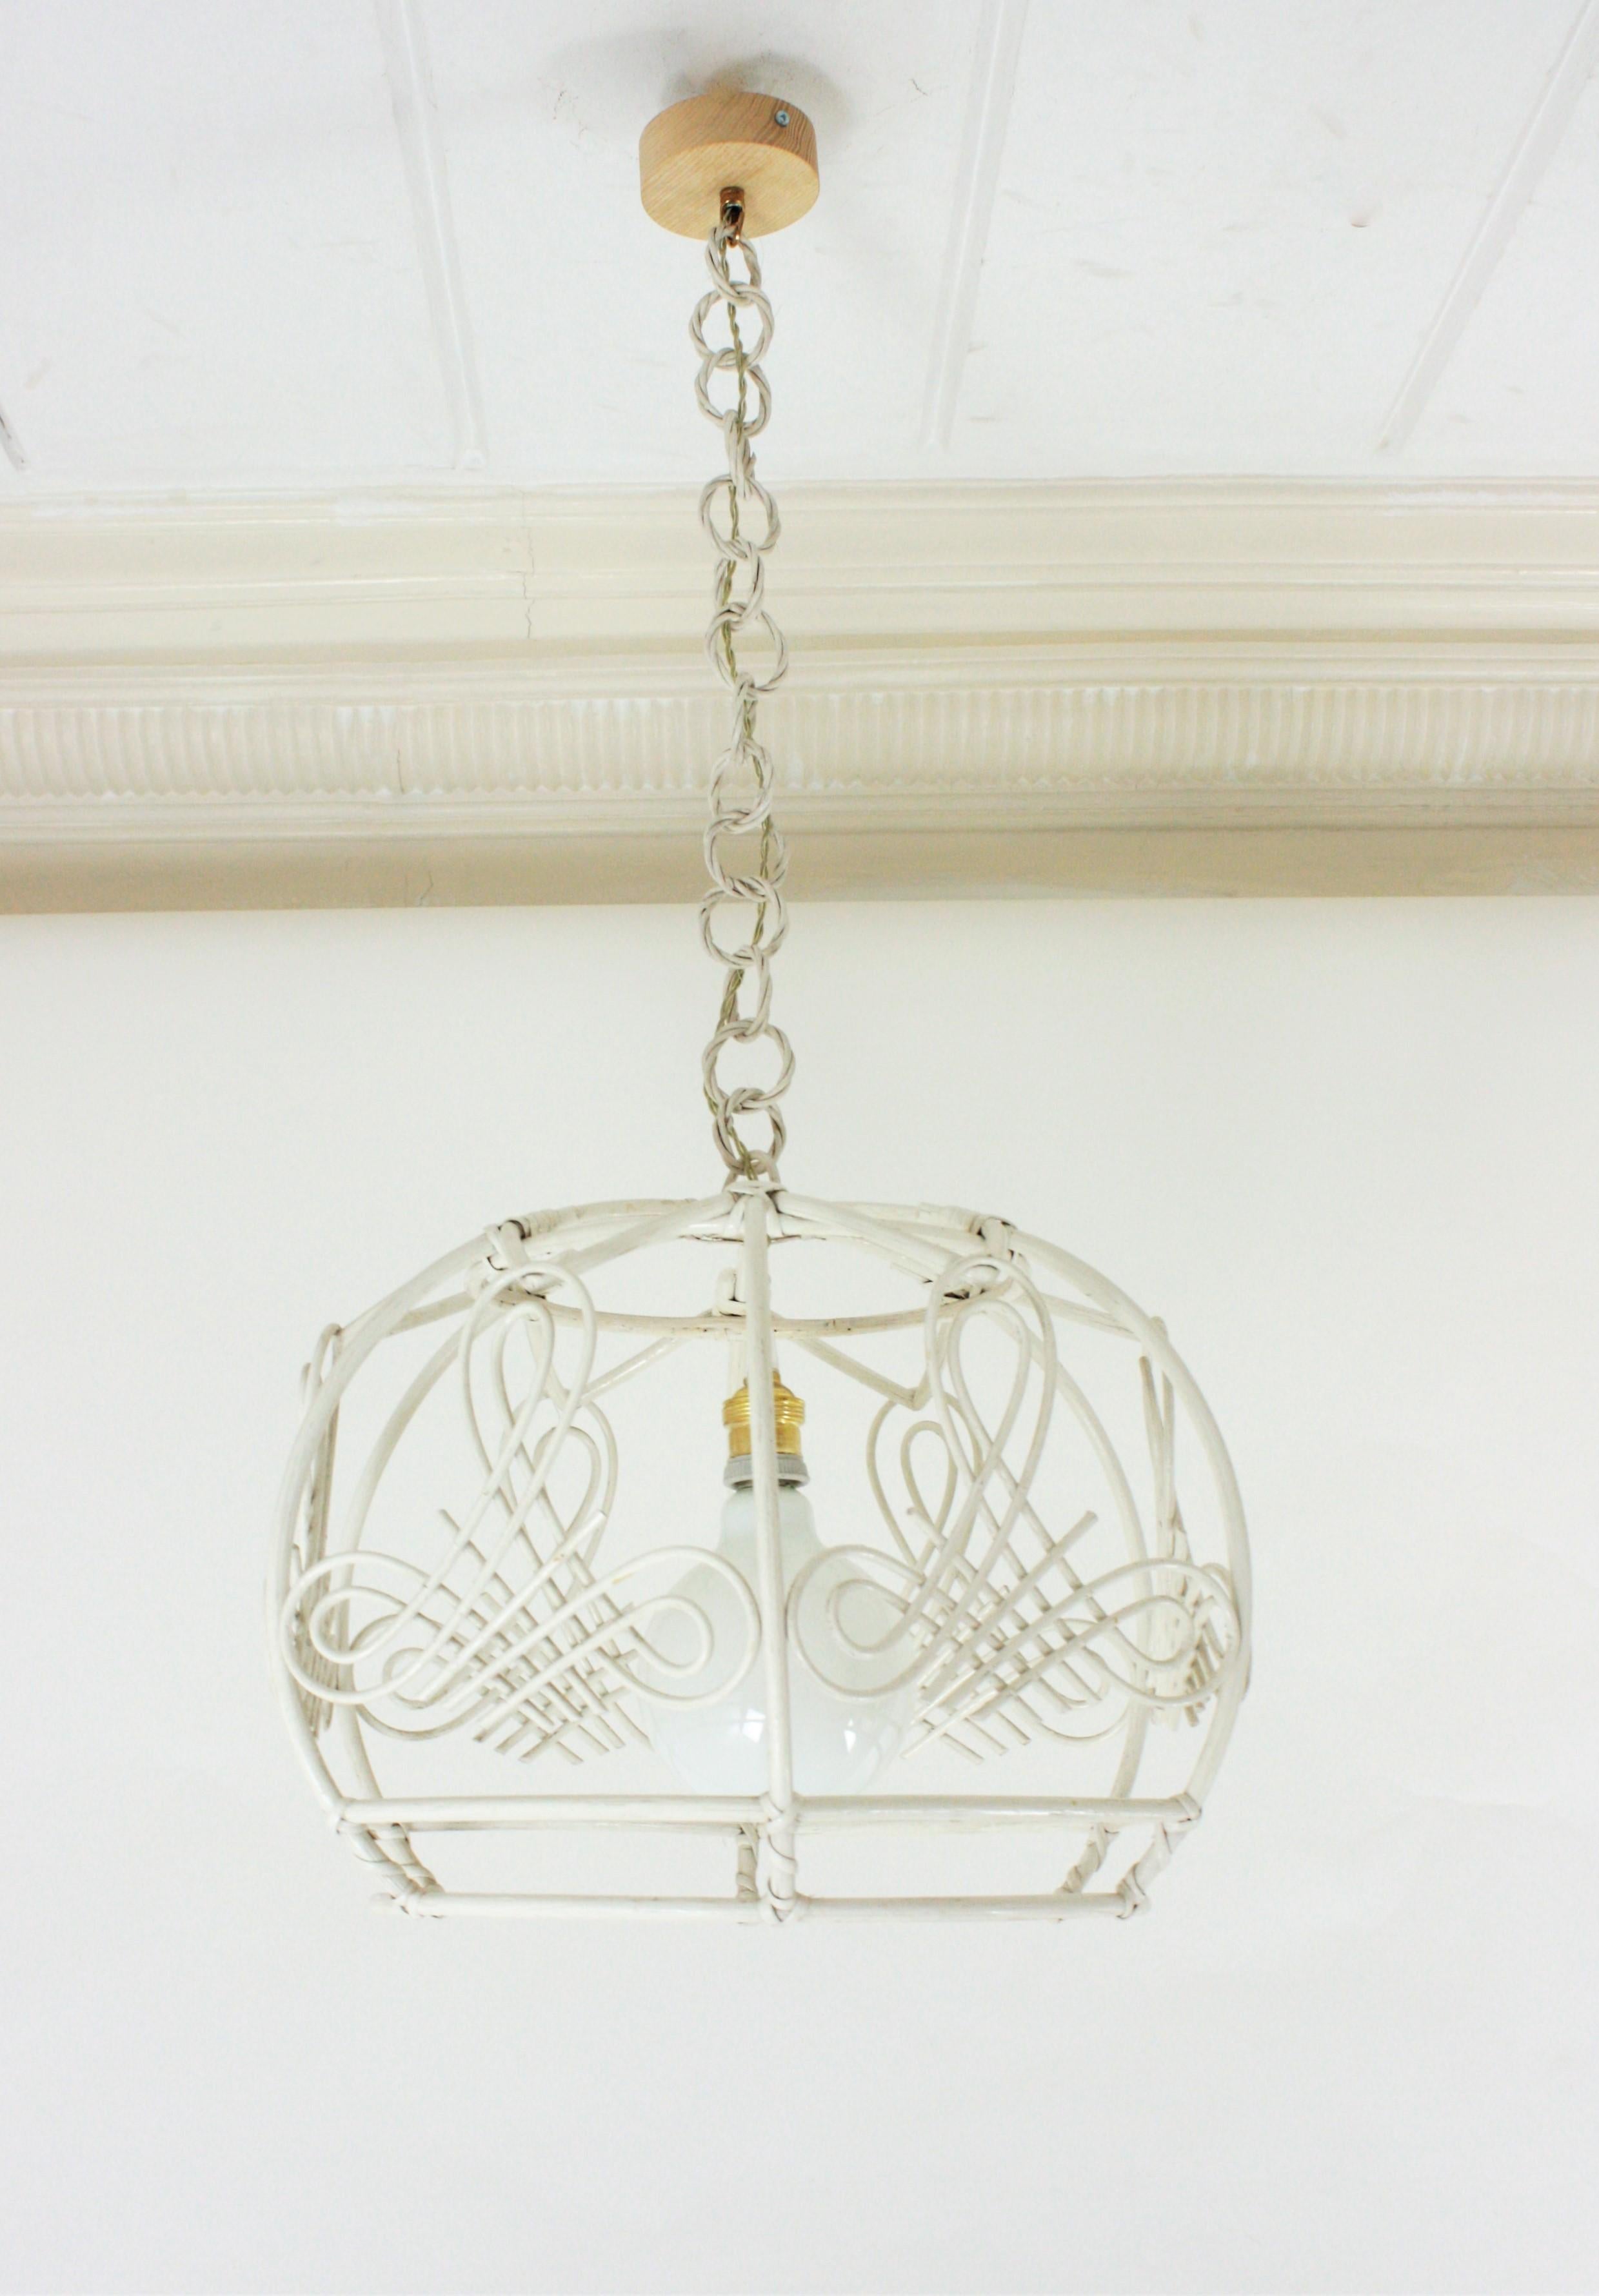 Bamboo French Rattan Bell Pendant Lamp / Lantern in White Patina, 1960s For Sale